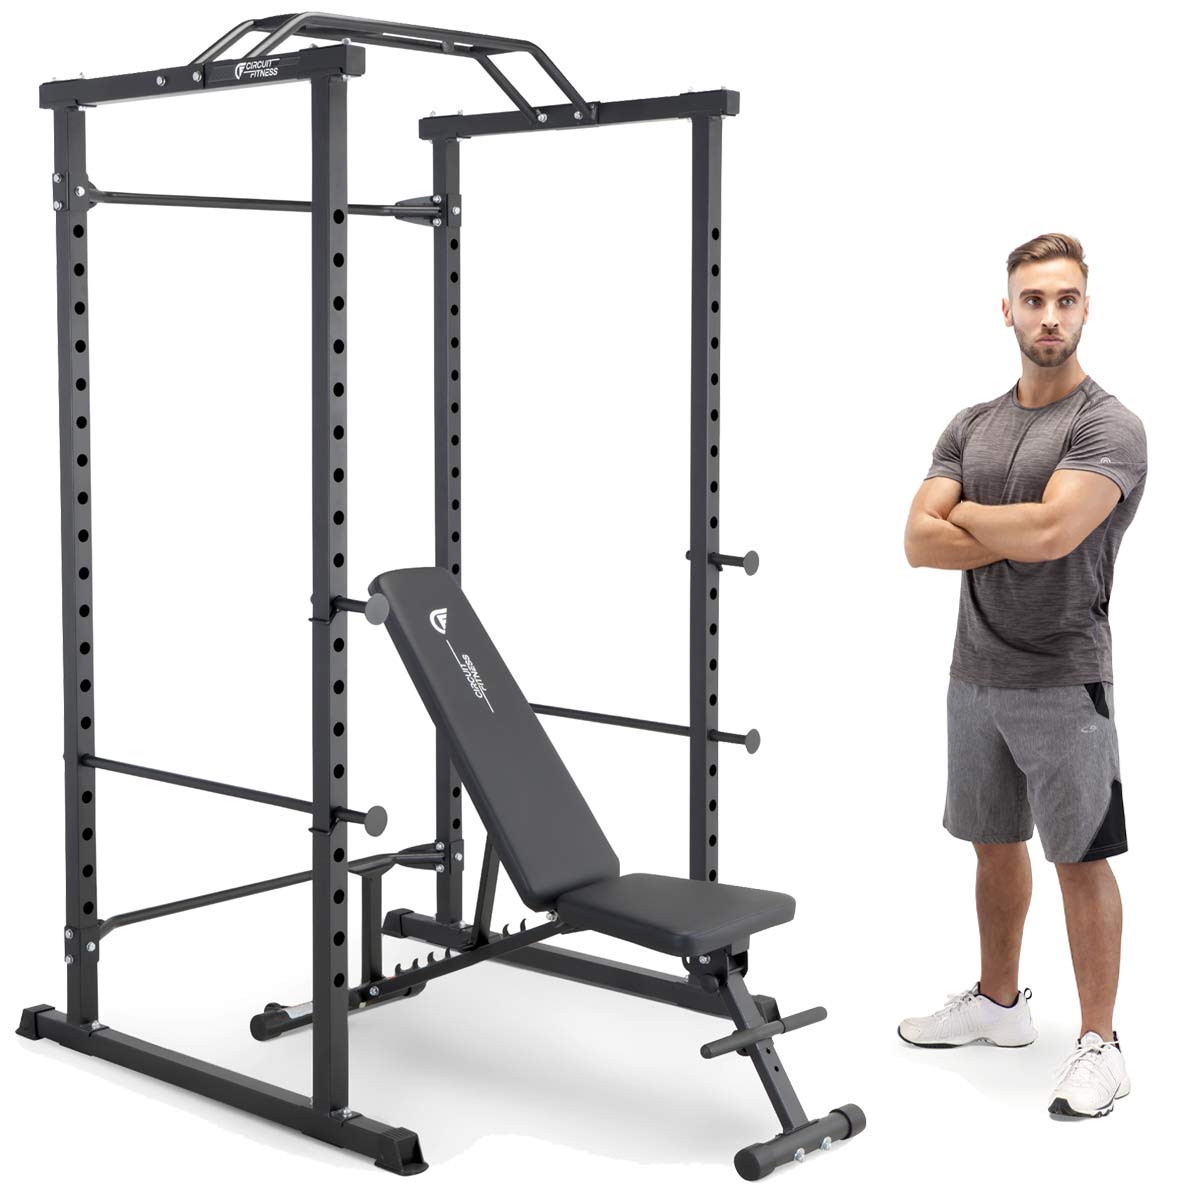 Buy FirstFit Suspension Training Kit, All-in-One Full Body Workouts for  Home, Travel, Outdoors, Gym - Bodyweight Resistance System - Build Muscle,  Improve Cardio Kit Combo for Men & Women Online at Best